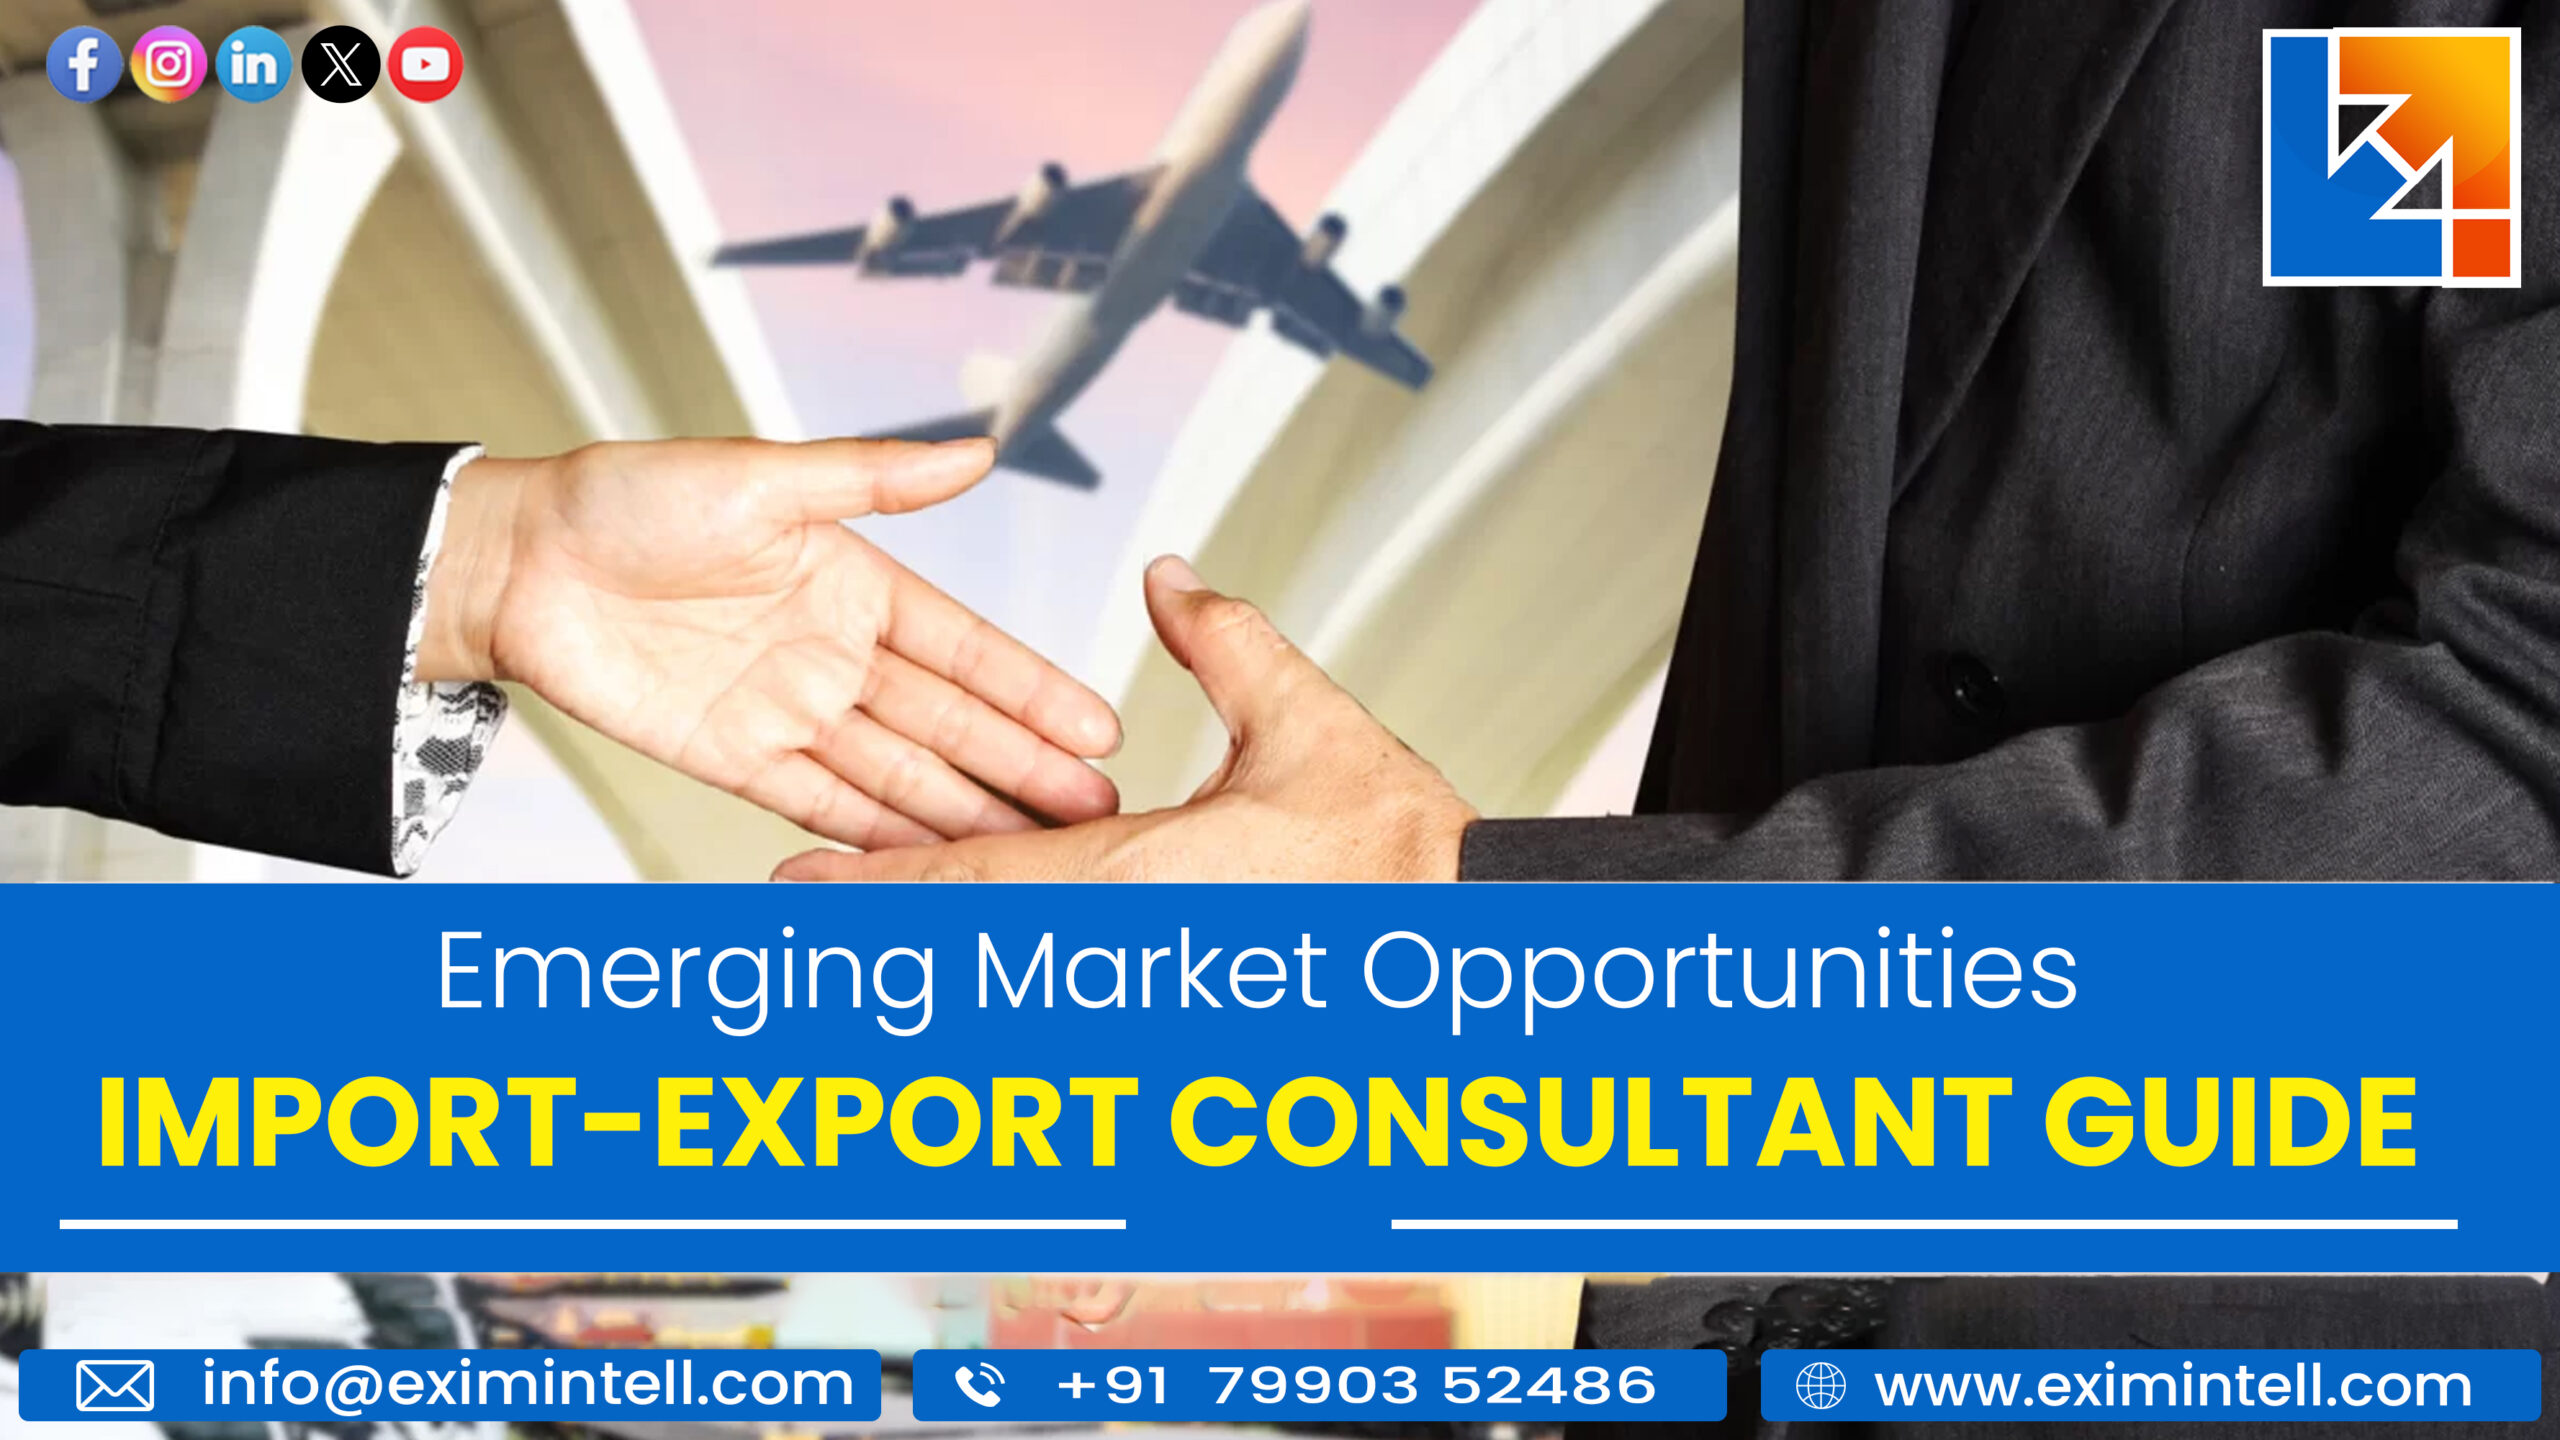 Emerging Market Opportunities: Import-Export Consultant Guide